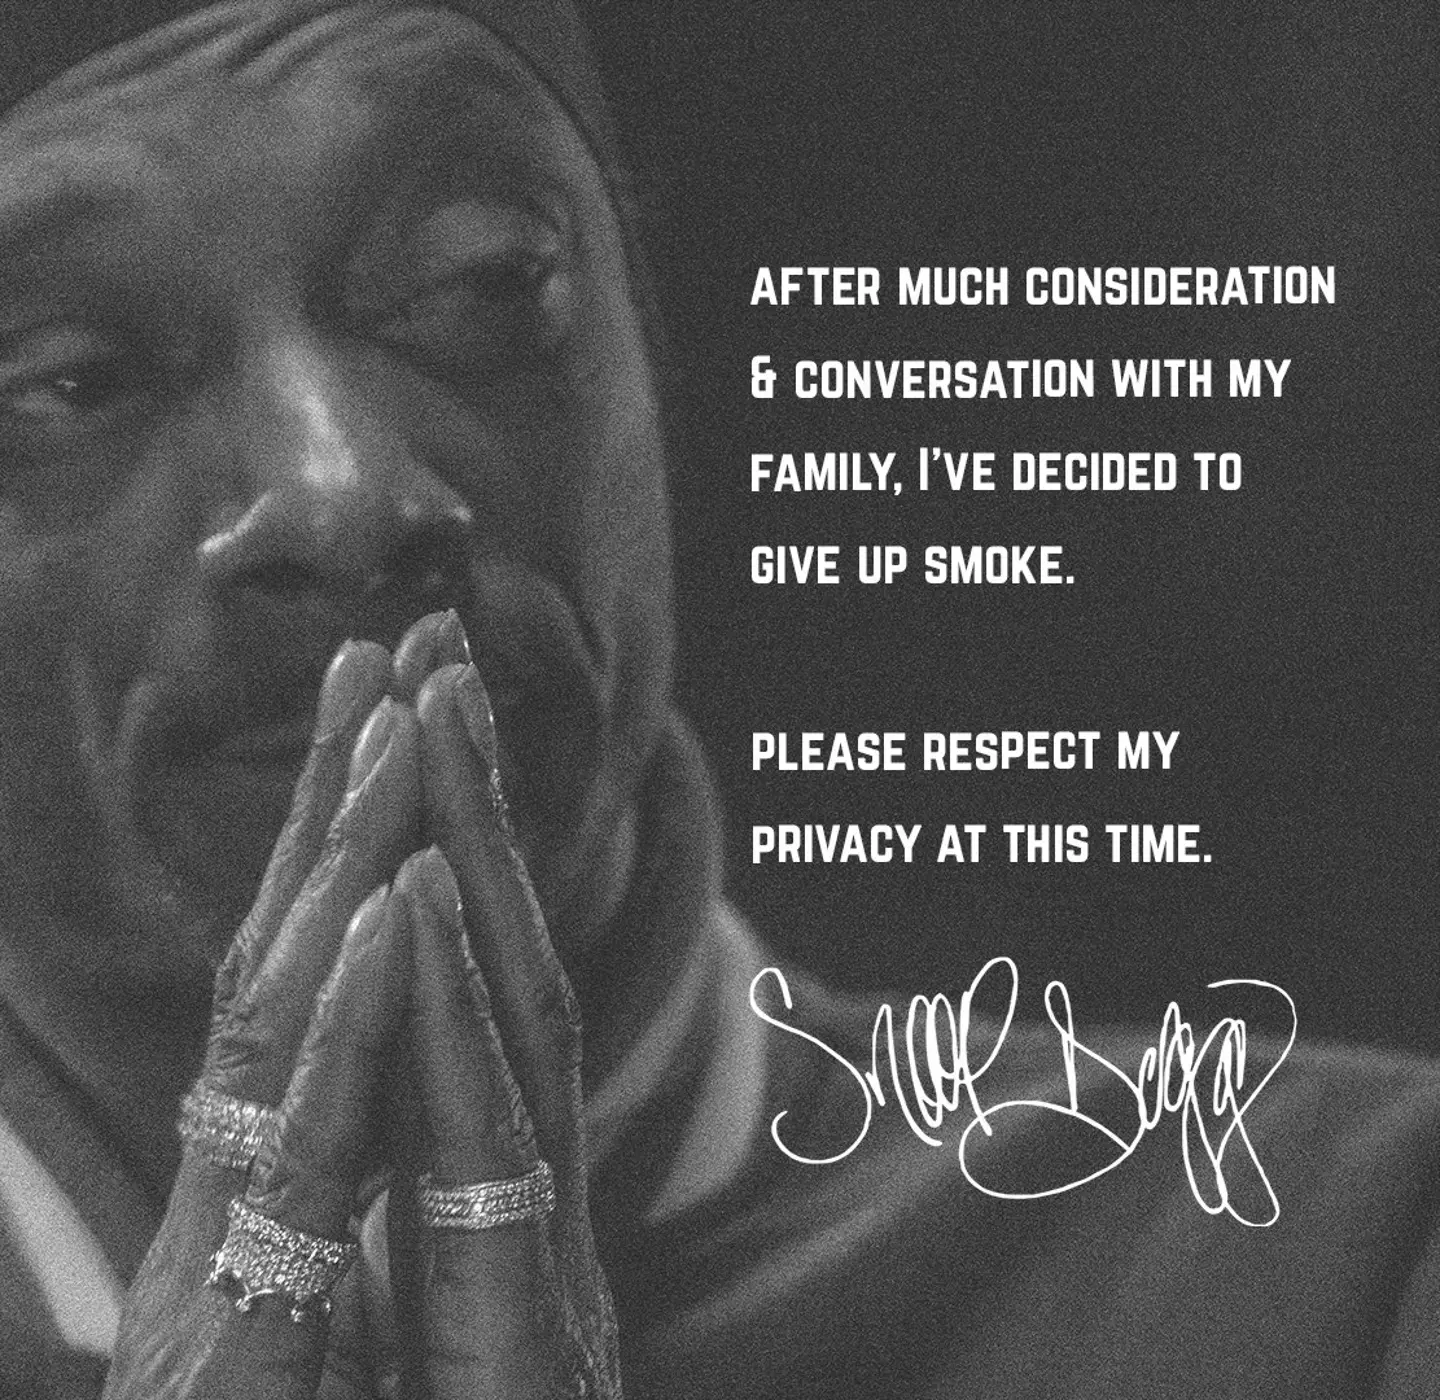 Snoop Dogg has made the shock announcement that he is 'giving up smoke' for family reasons.